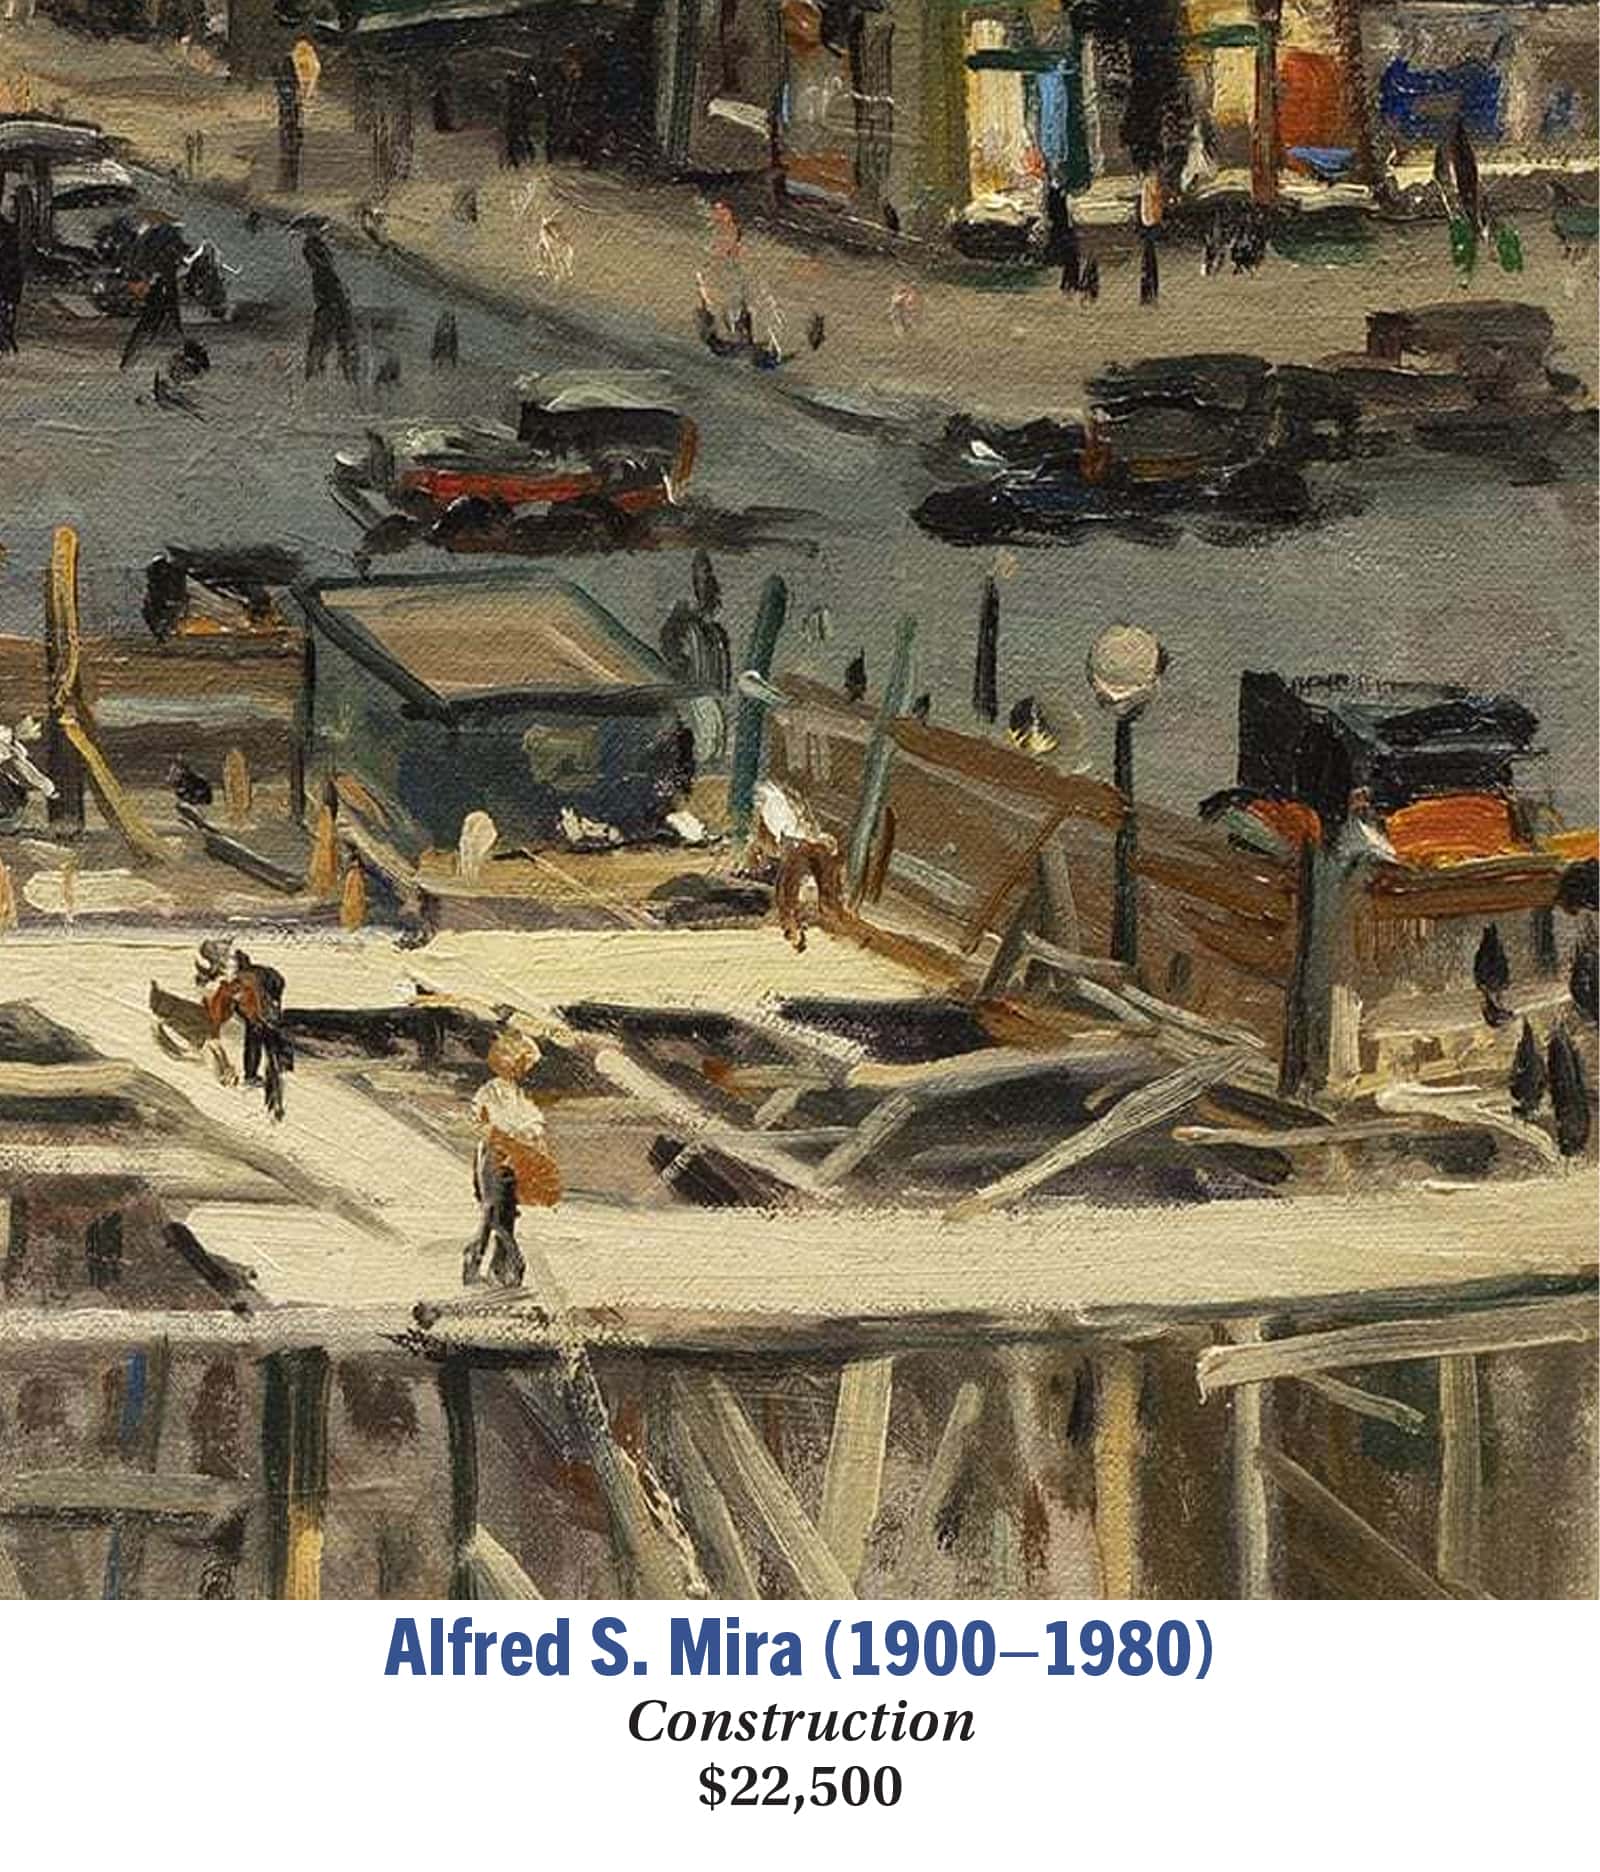 Alfred S. Mira (1900–1980), Construction, Oil on canvas board, American modernist painting, detail image